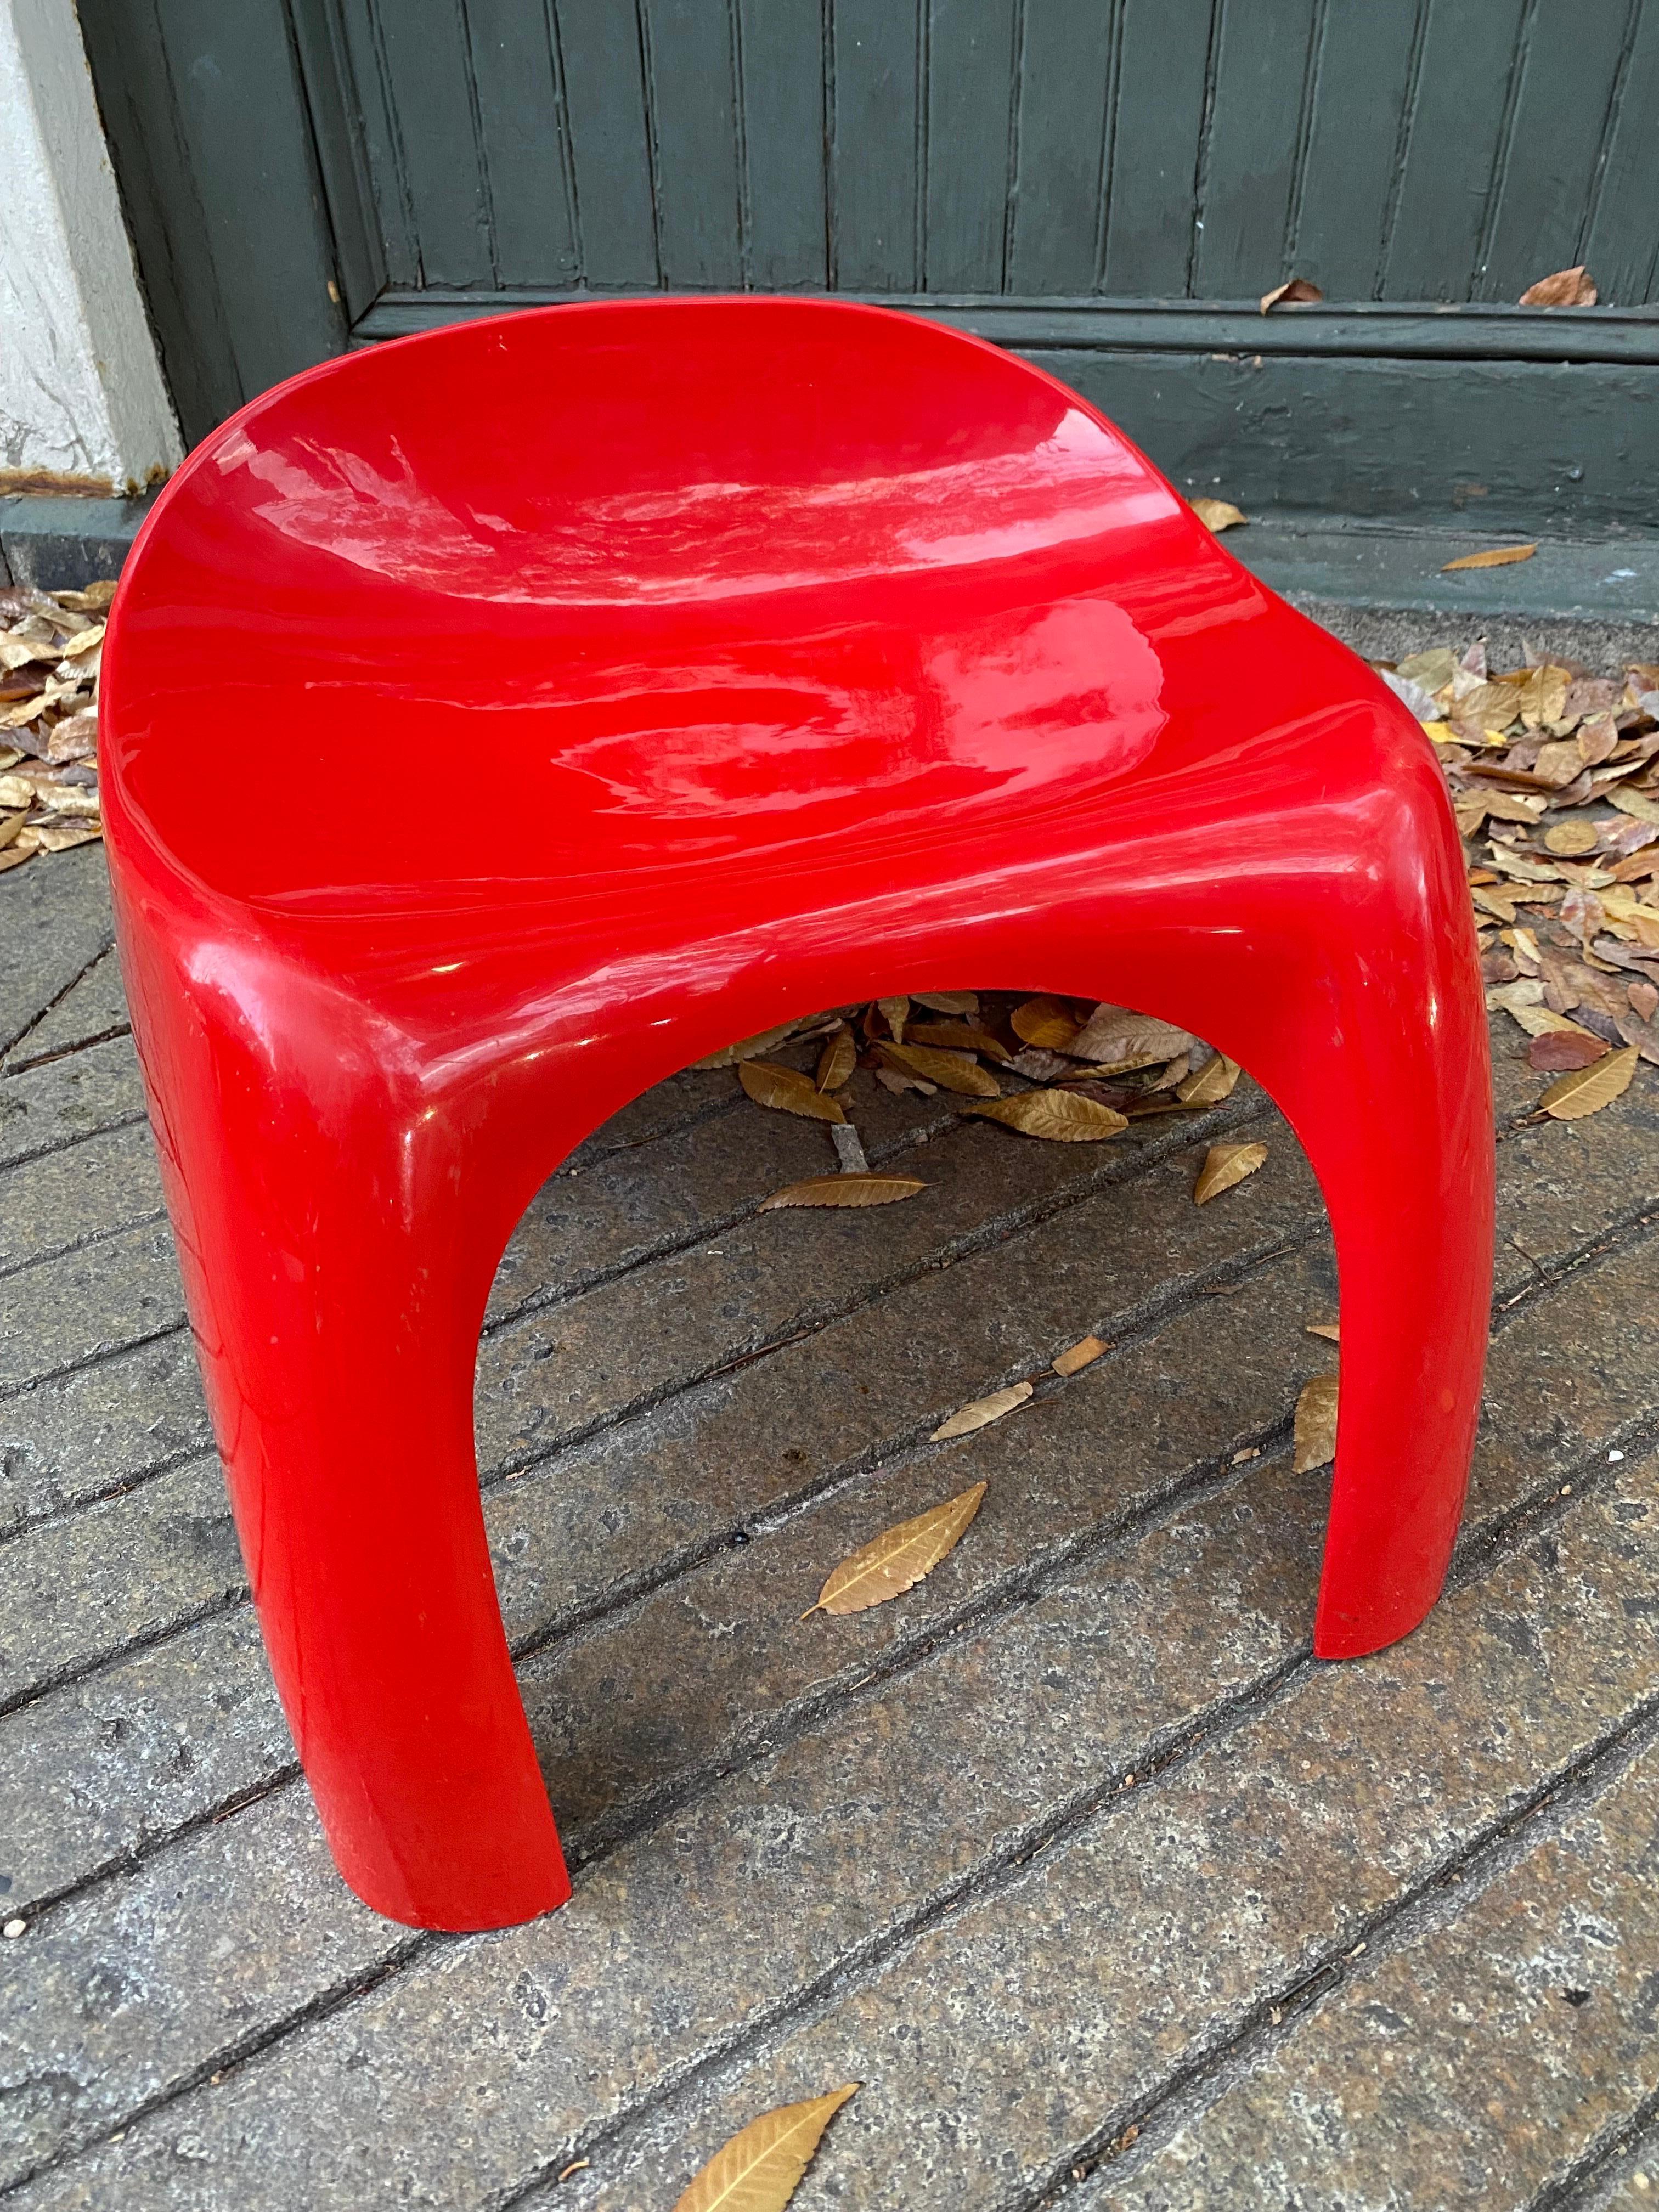 Stacy Dukes Efebo Stool in Red.  3 Stools are available.  Plastic polishes up very well, shows some minor scratches but pretty good shape for 60's plastic!  These are the larger of the sizes, designed for adults.  Stools sit well and surprisingly